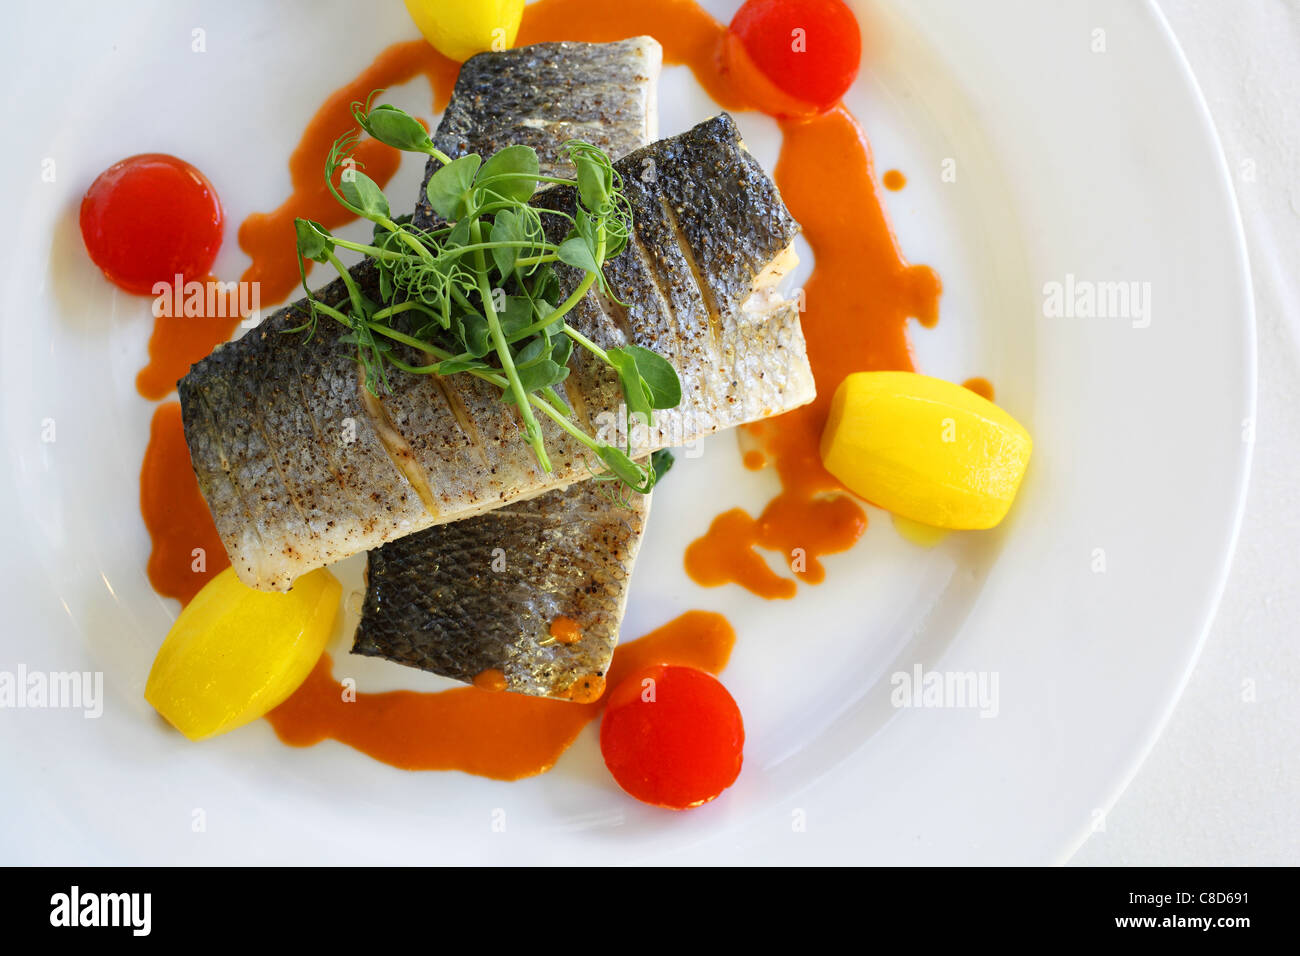 sea bass fish cooked Stock Photo